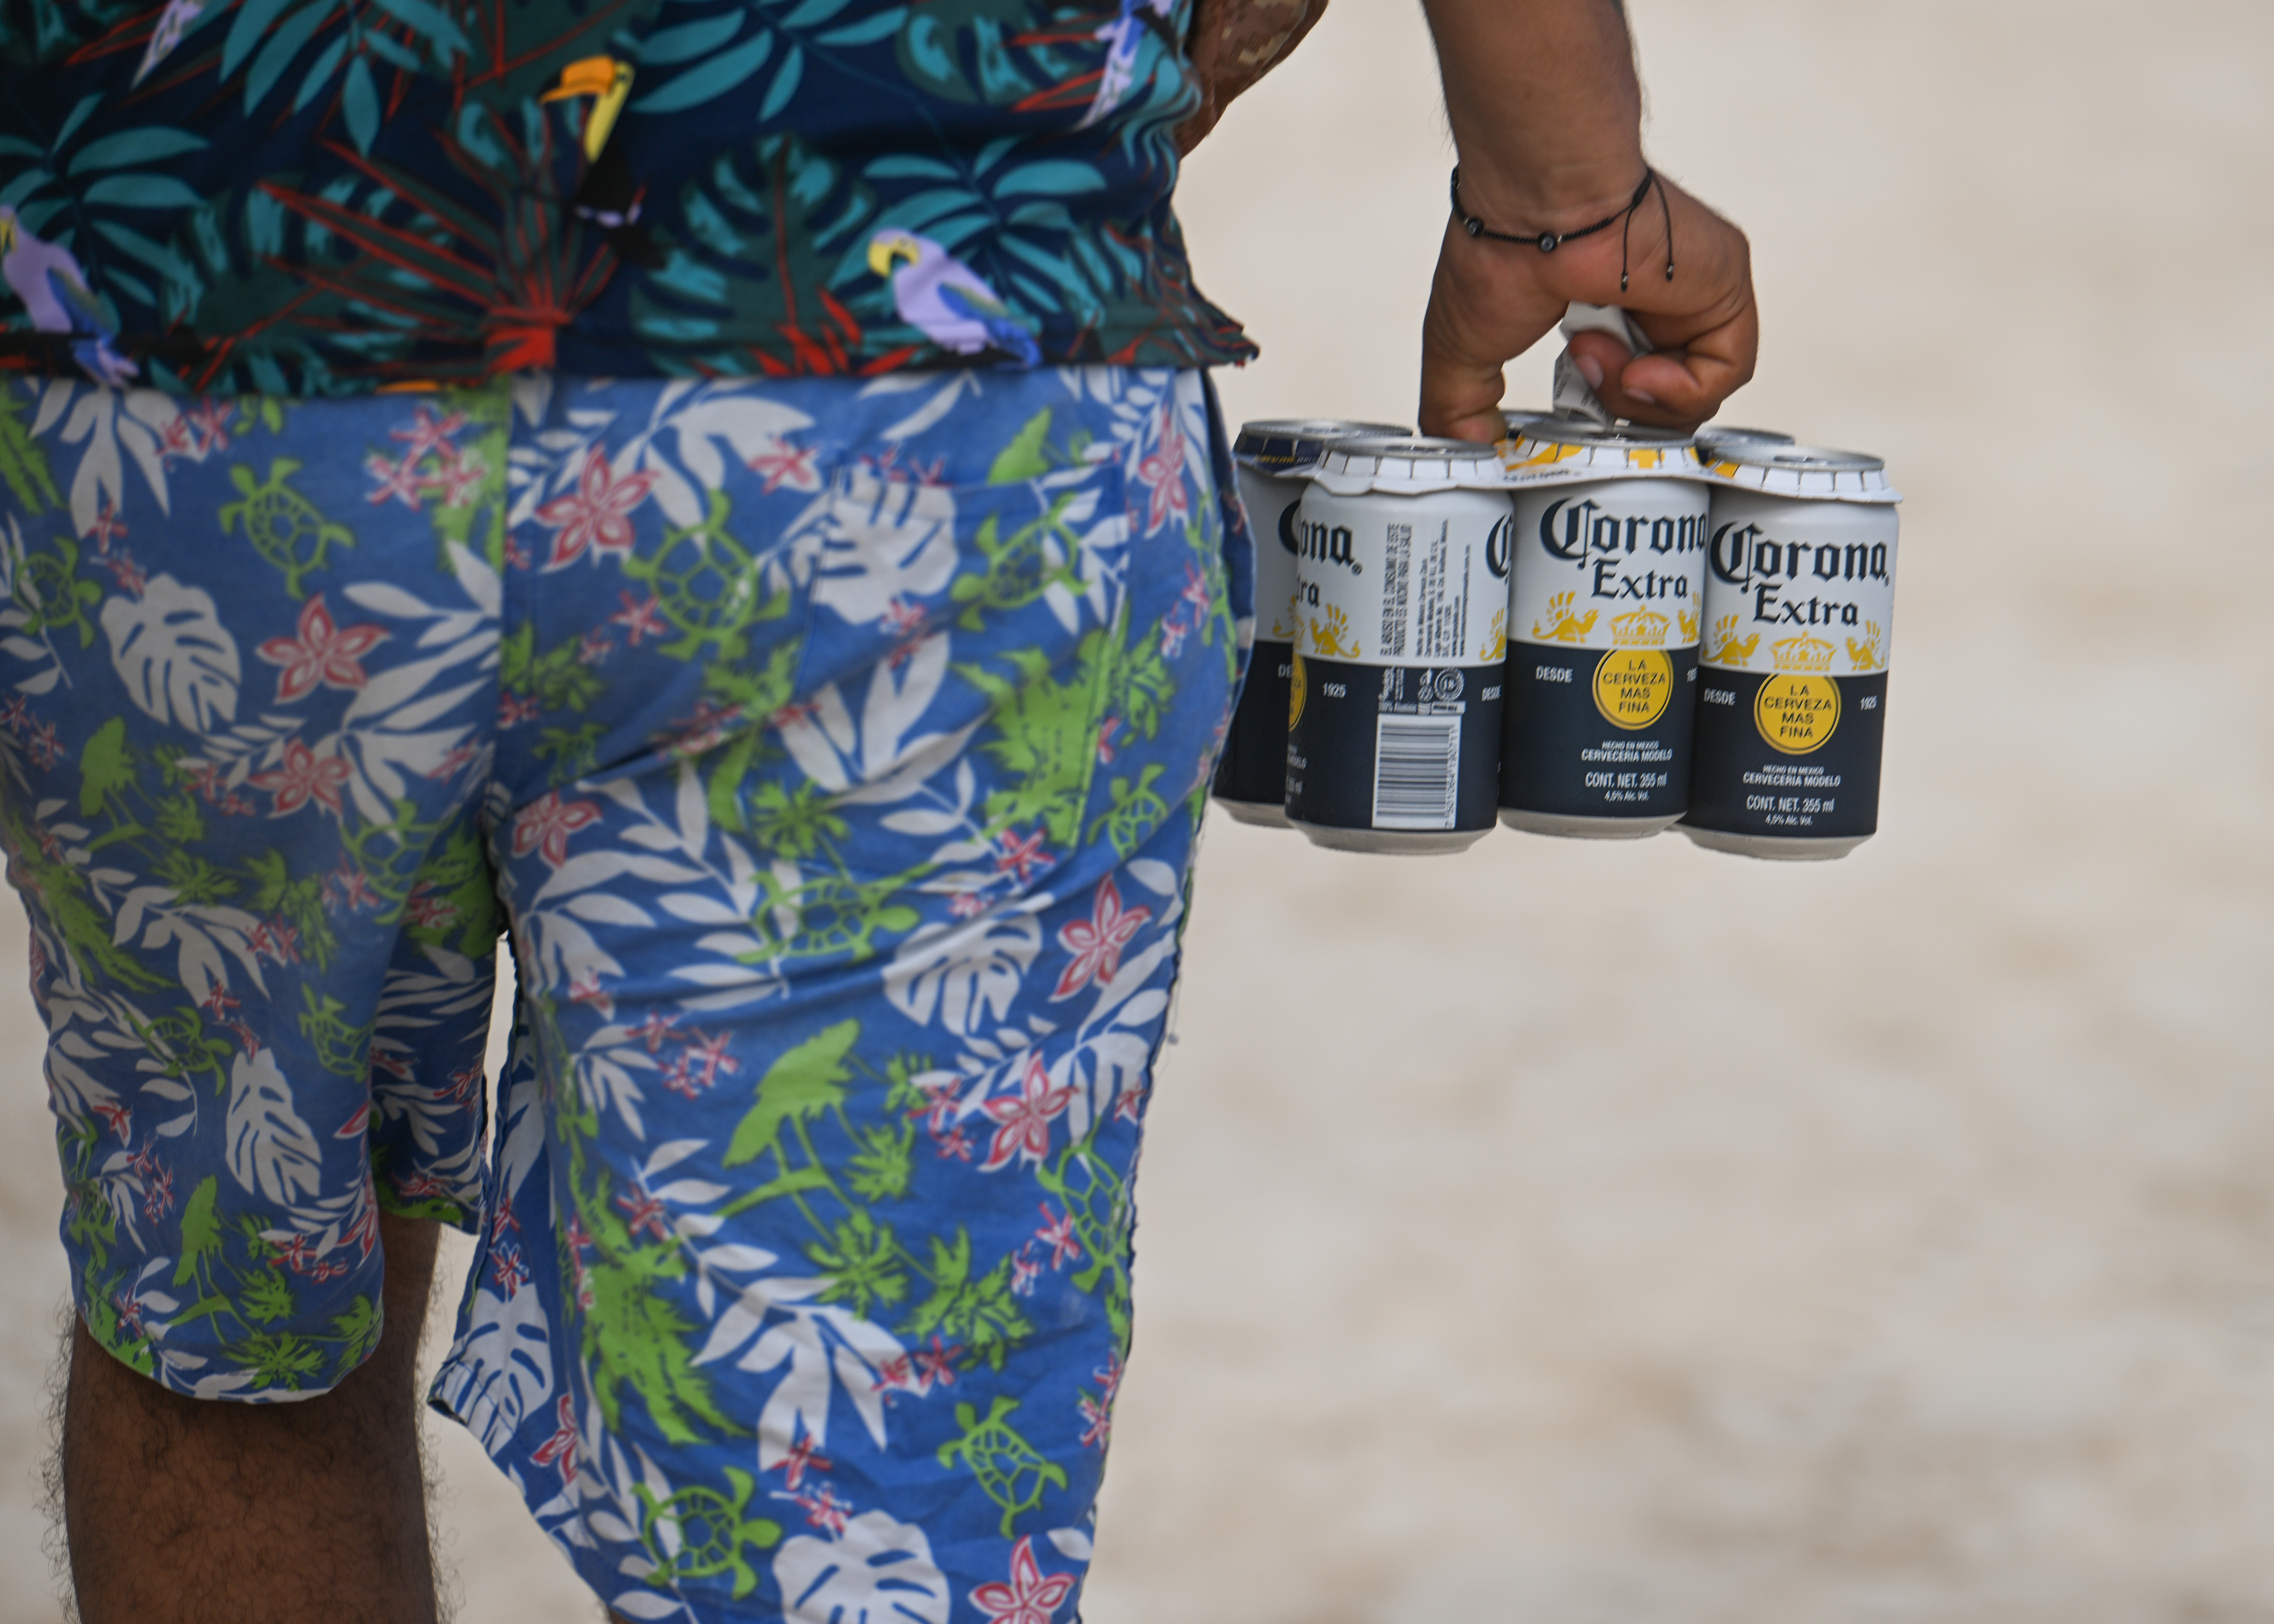 A person in floral shorts holds a 6-pack of Corona beer cans at a beach